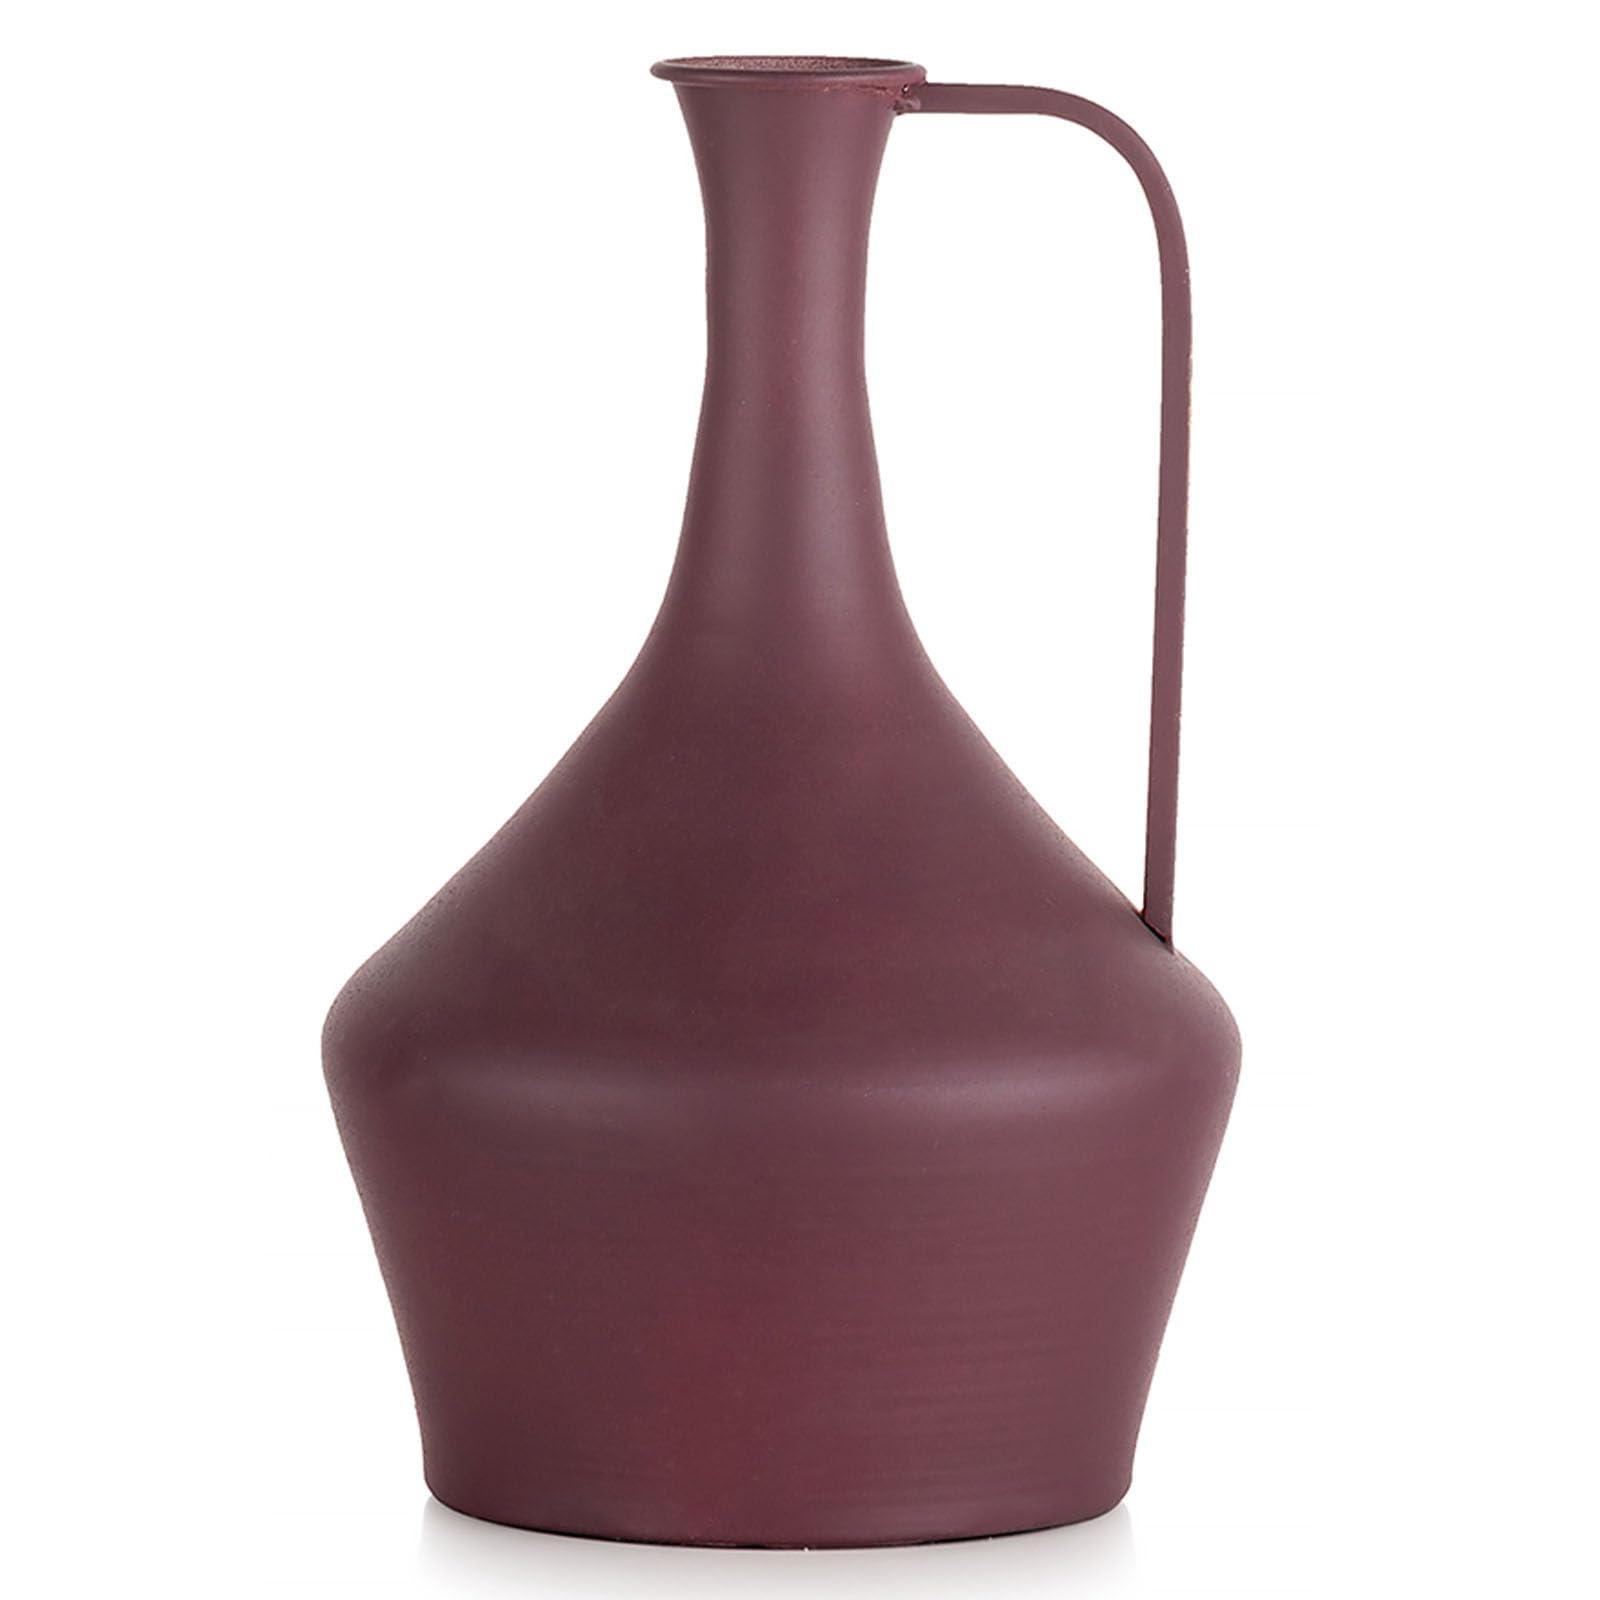 Sziqiqi Metal Pitcher Flowers Vases - 26cm Modern Vases with Handle Single Stem Vase for Table Red Morandi Matte Vases for Artificial Plants Love Gift for Mum Women Wife Sister